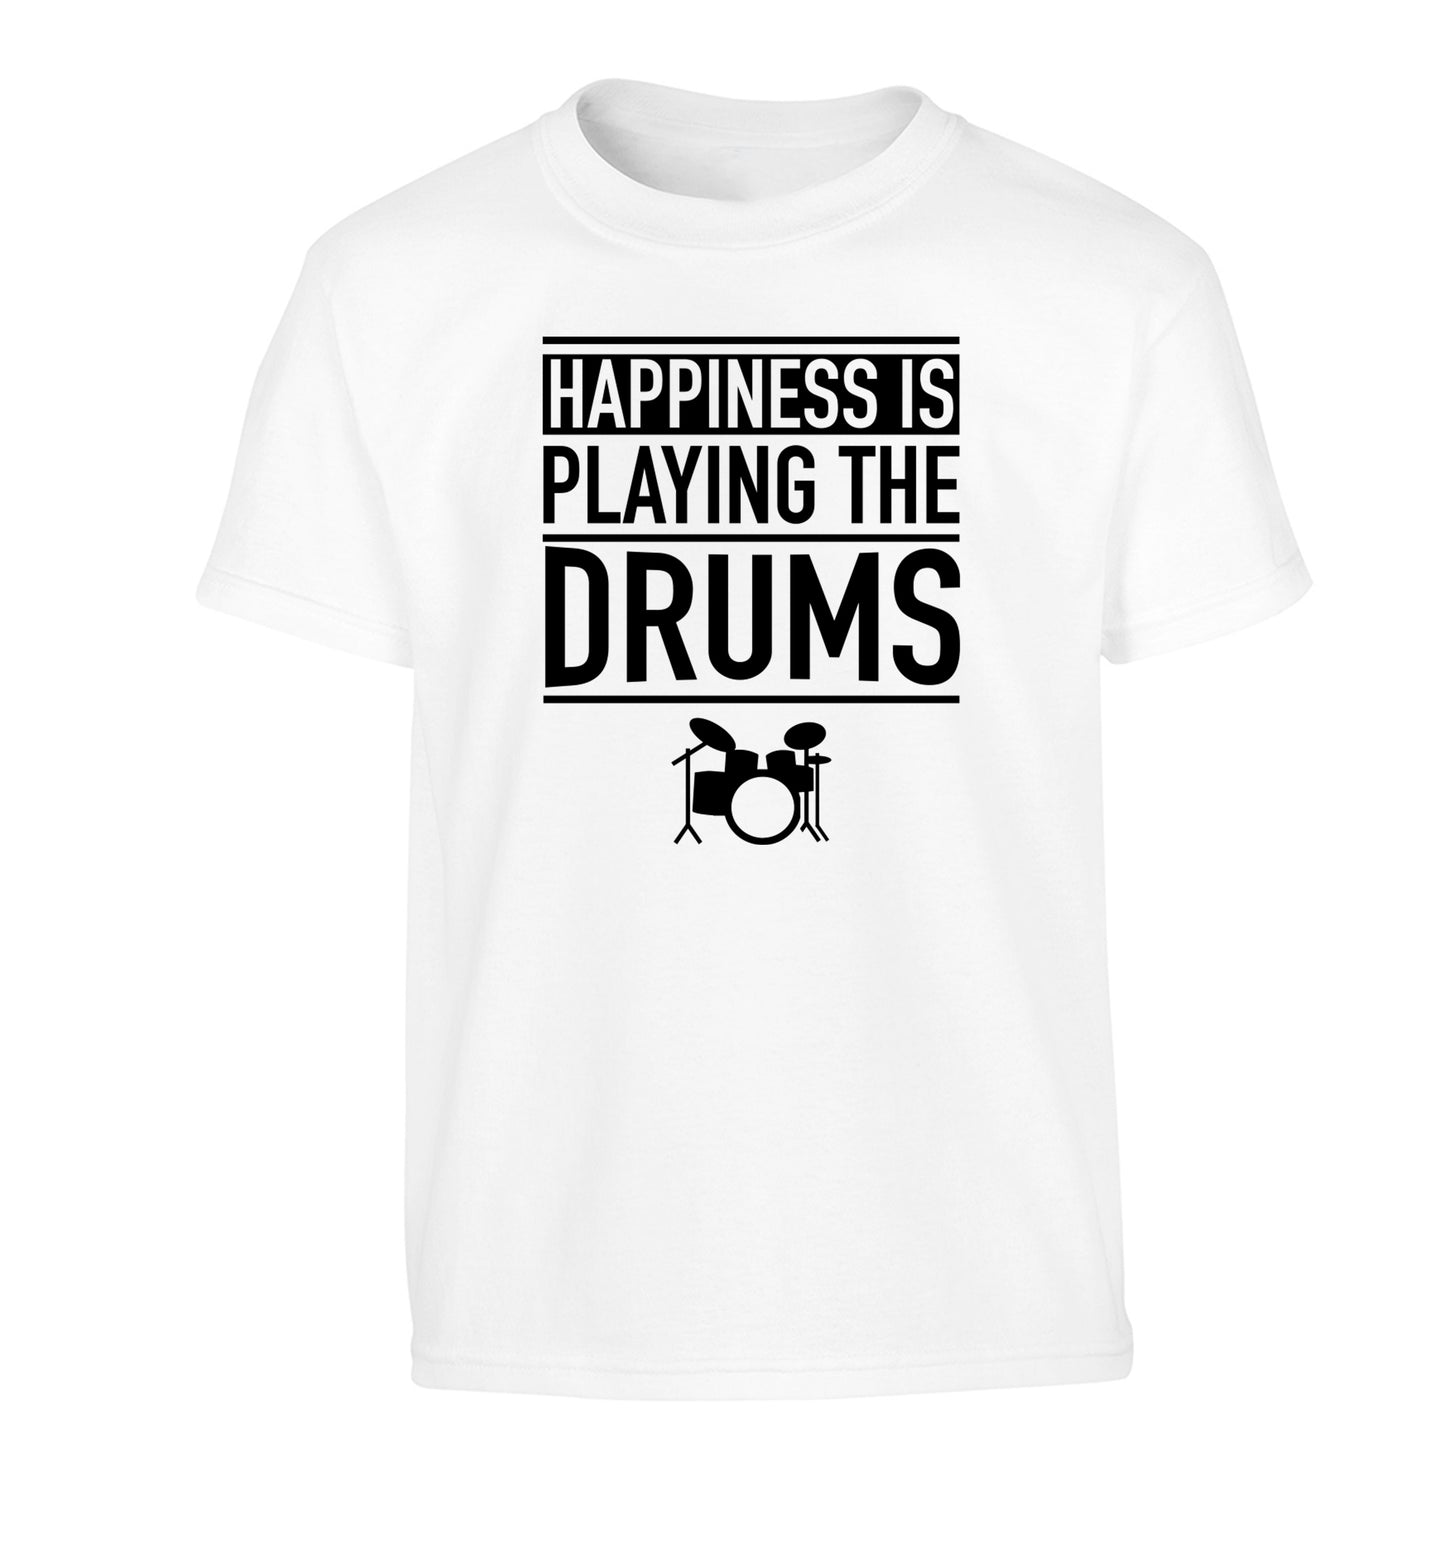 Happiness is playing the drums Children's white Tshirt 12-14 Years